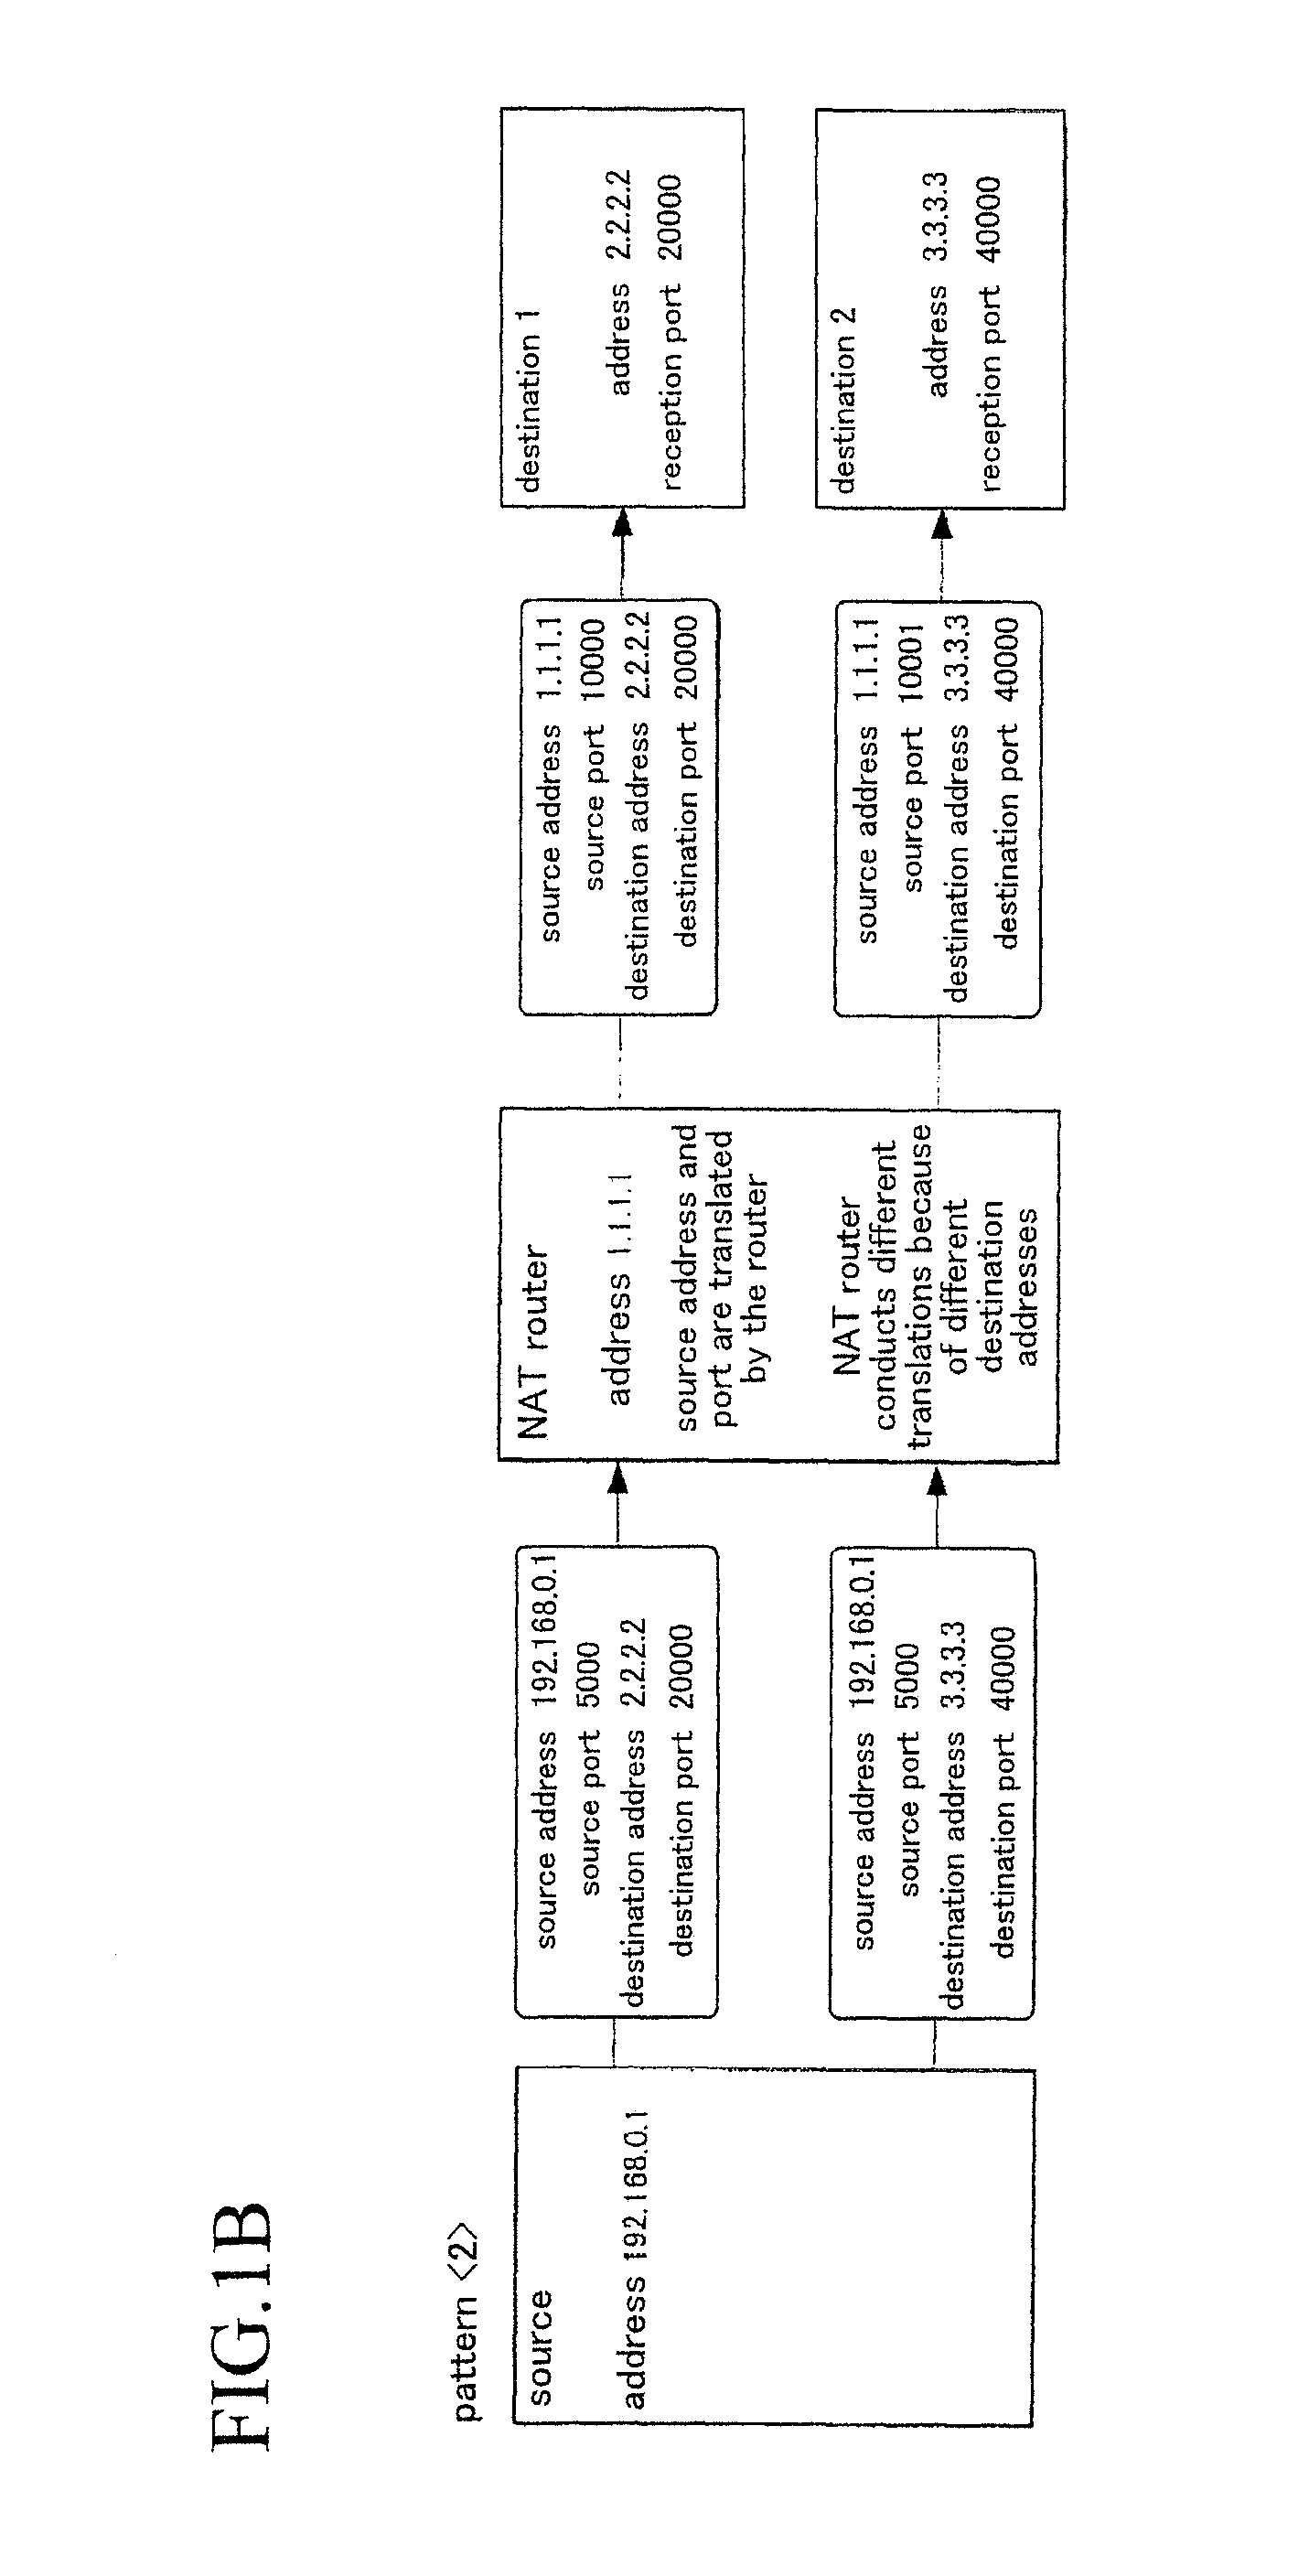 Communication system and server